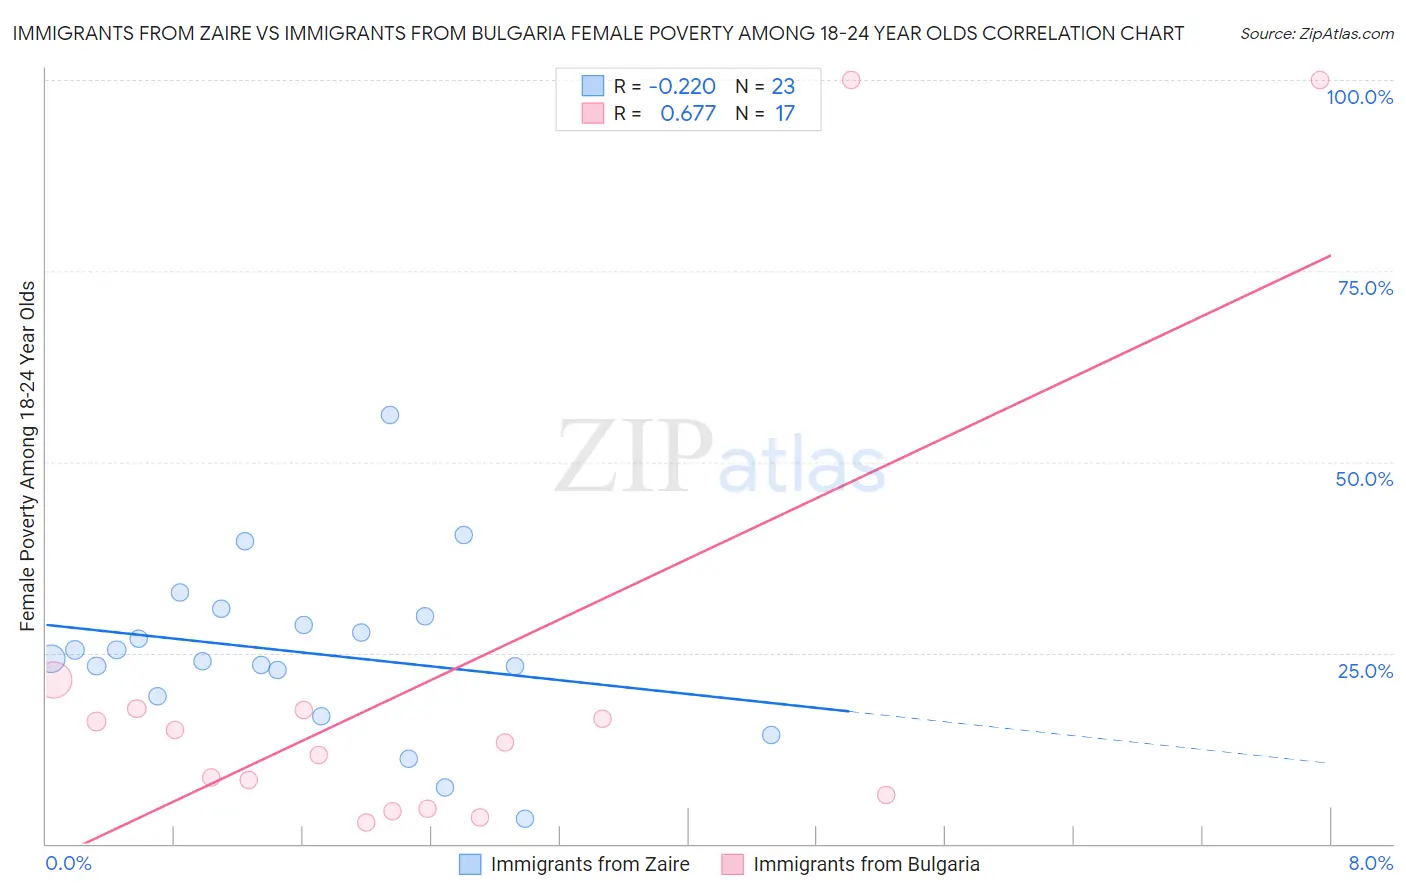 Immigrants from Zaire vs Immigrants from Bulgaria Female Poverty Among 18-24 Year Olds